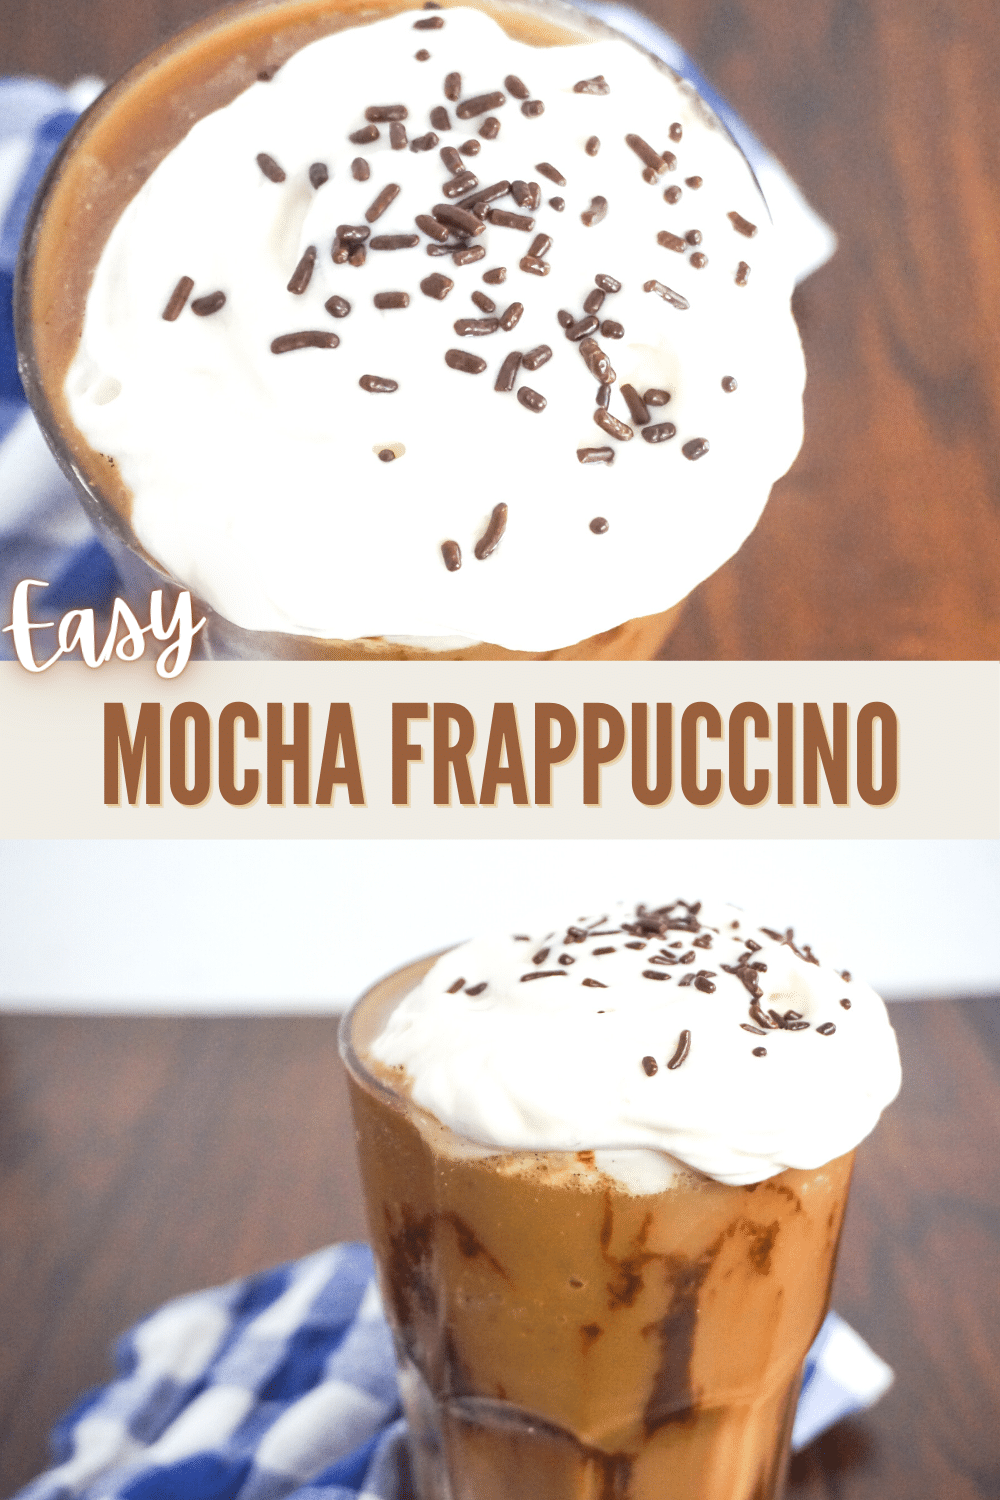 Love the taste and flavor of a mocha Frappuccino? It's time to take charge and make this homemade mocha frappuccino recipe yourself! #mochafrappuccino #mocha #frappuccino #homemadefrappuccino via @wondermomwannab